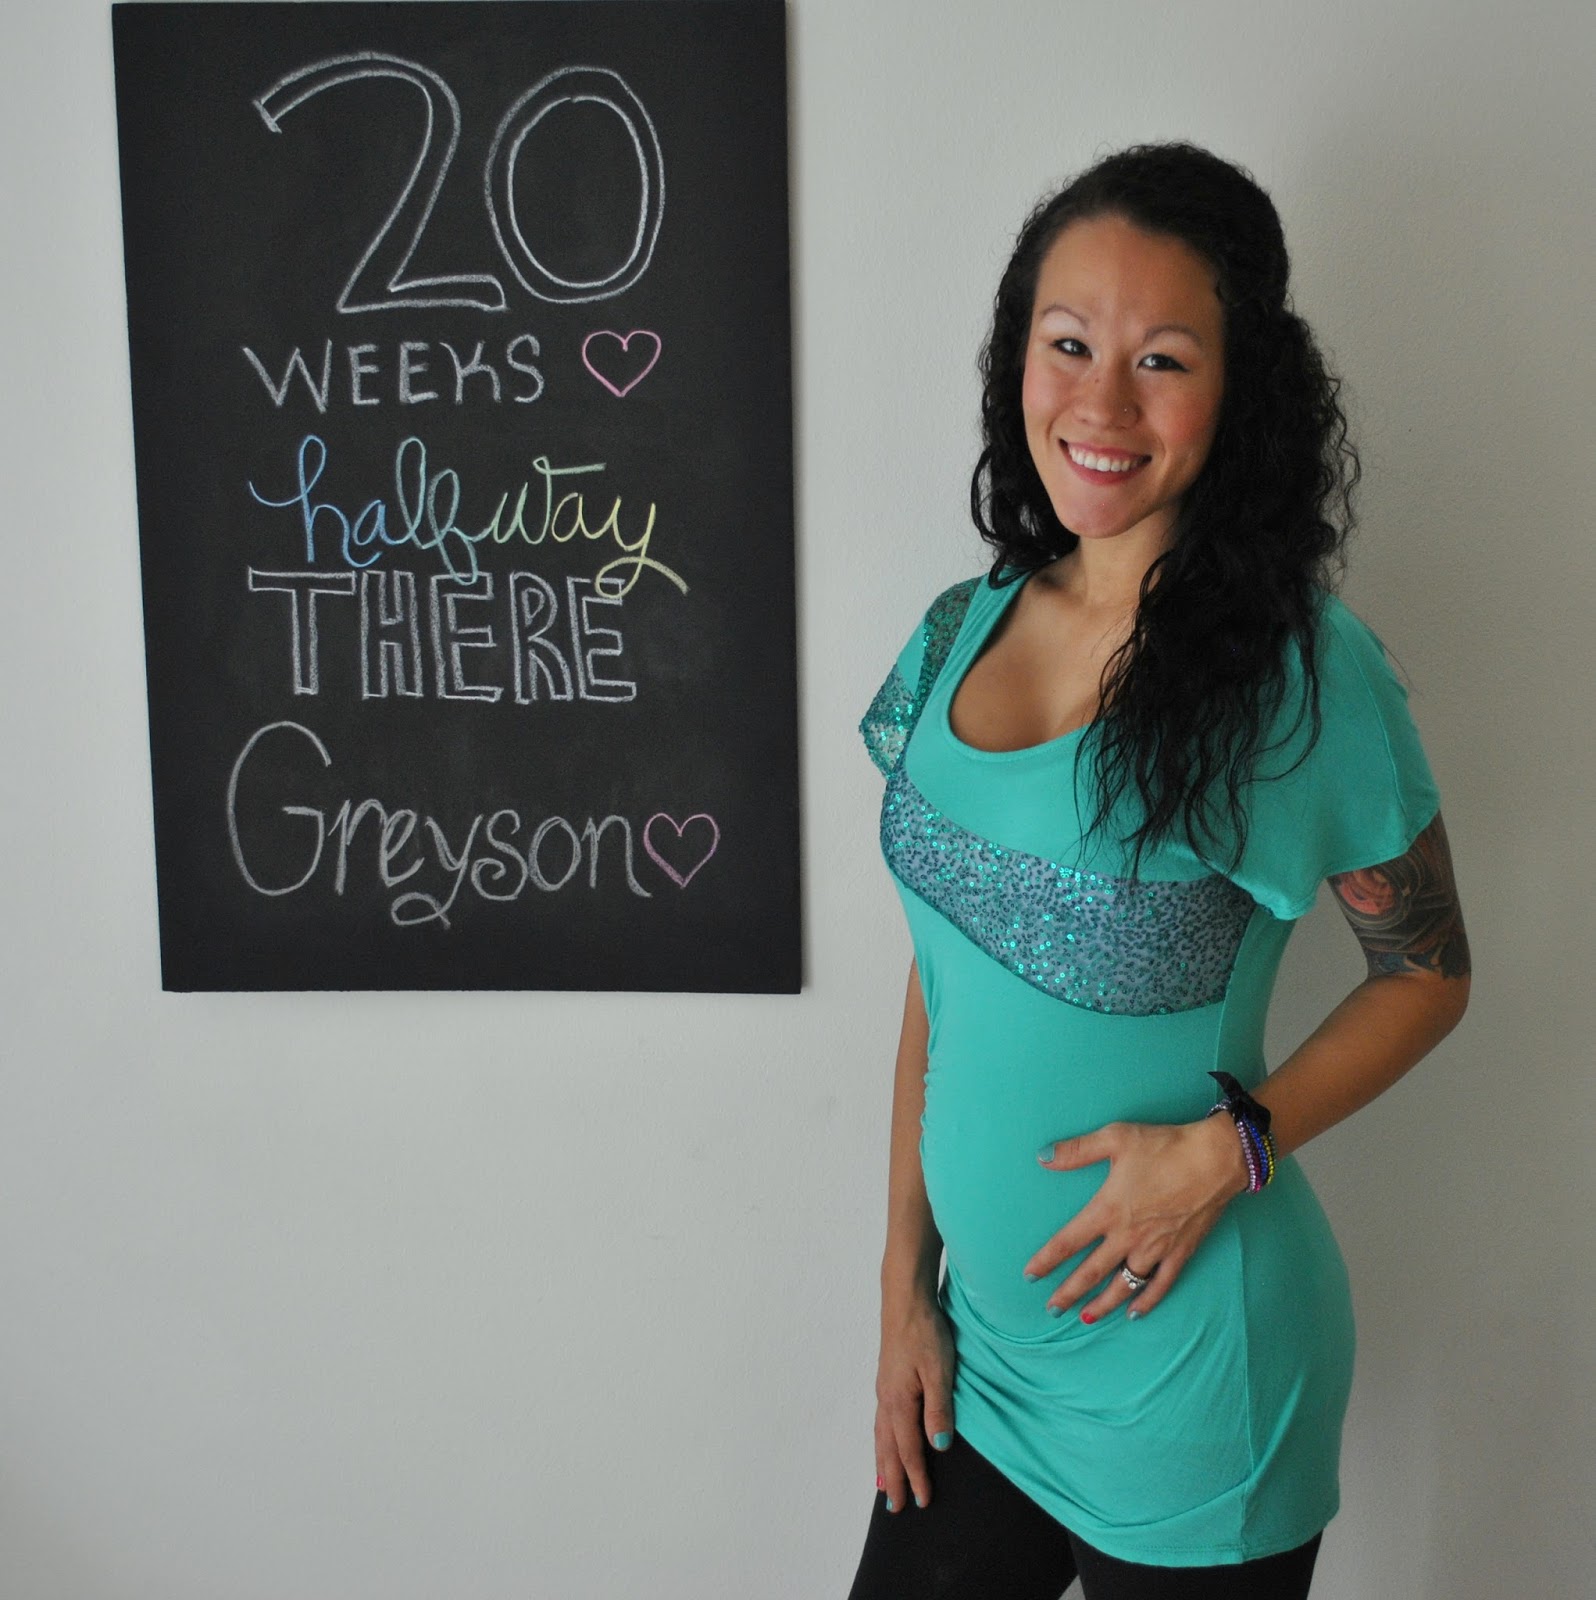 How Much Weight Should You Gain By 20 Weeks Pregnant